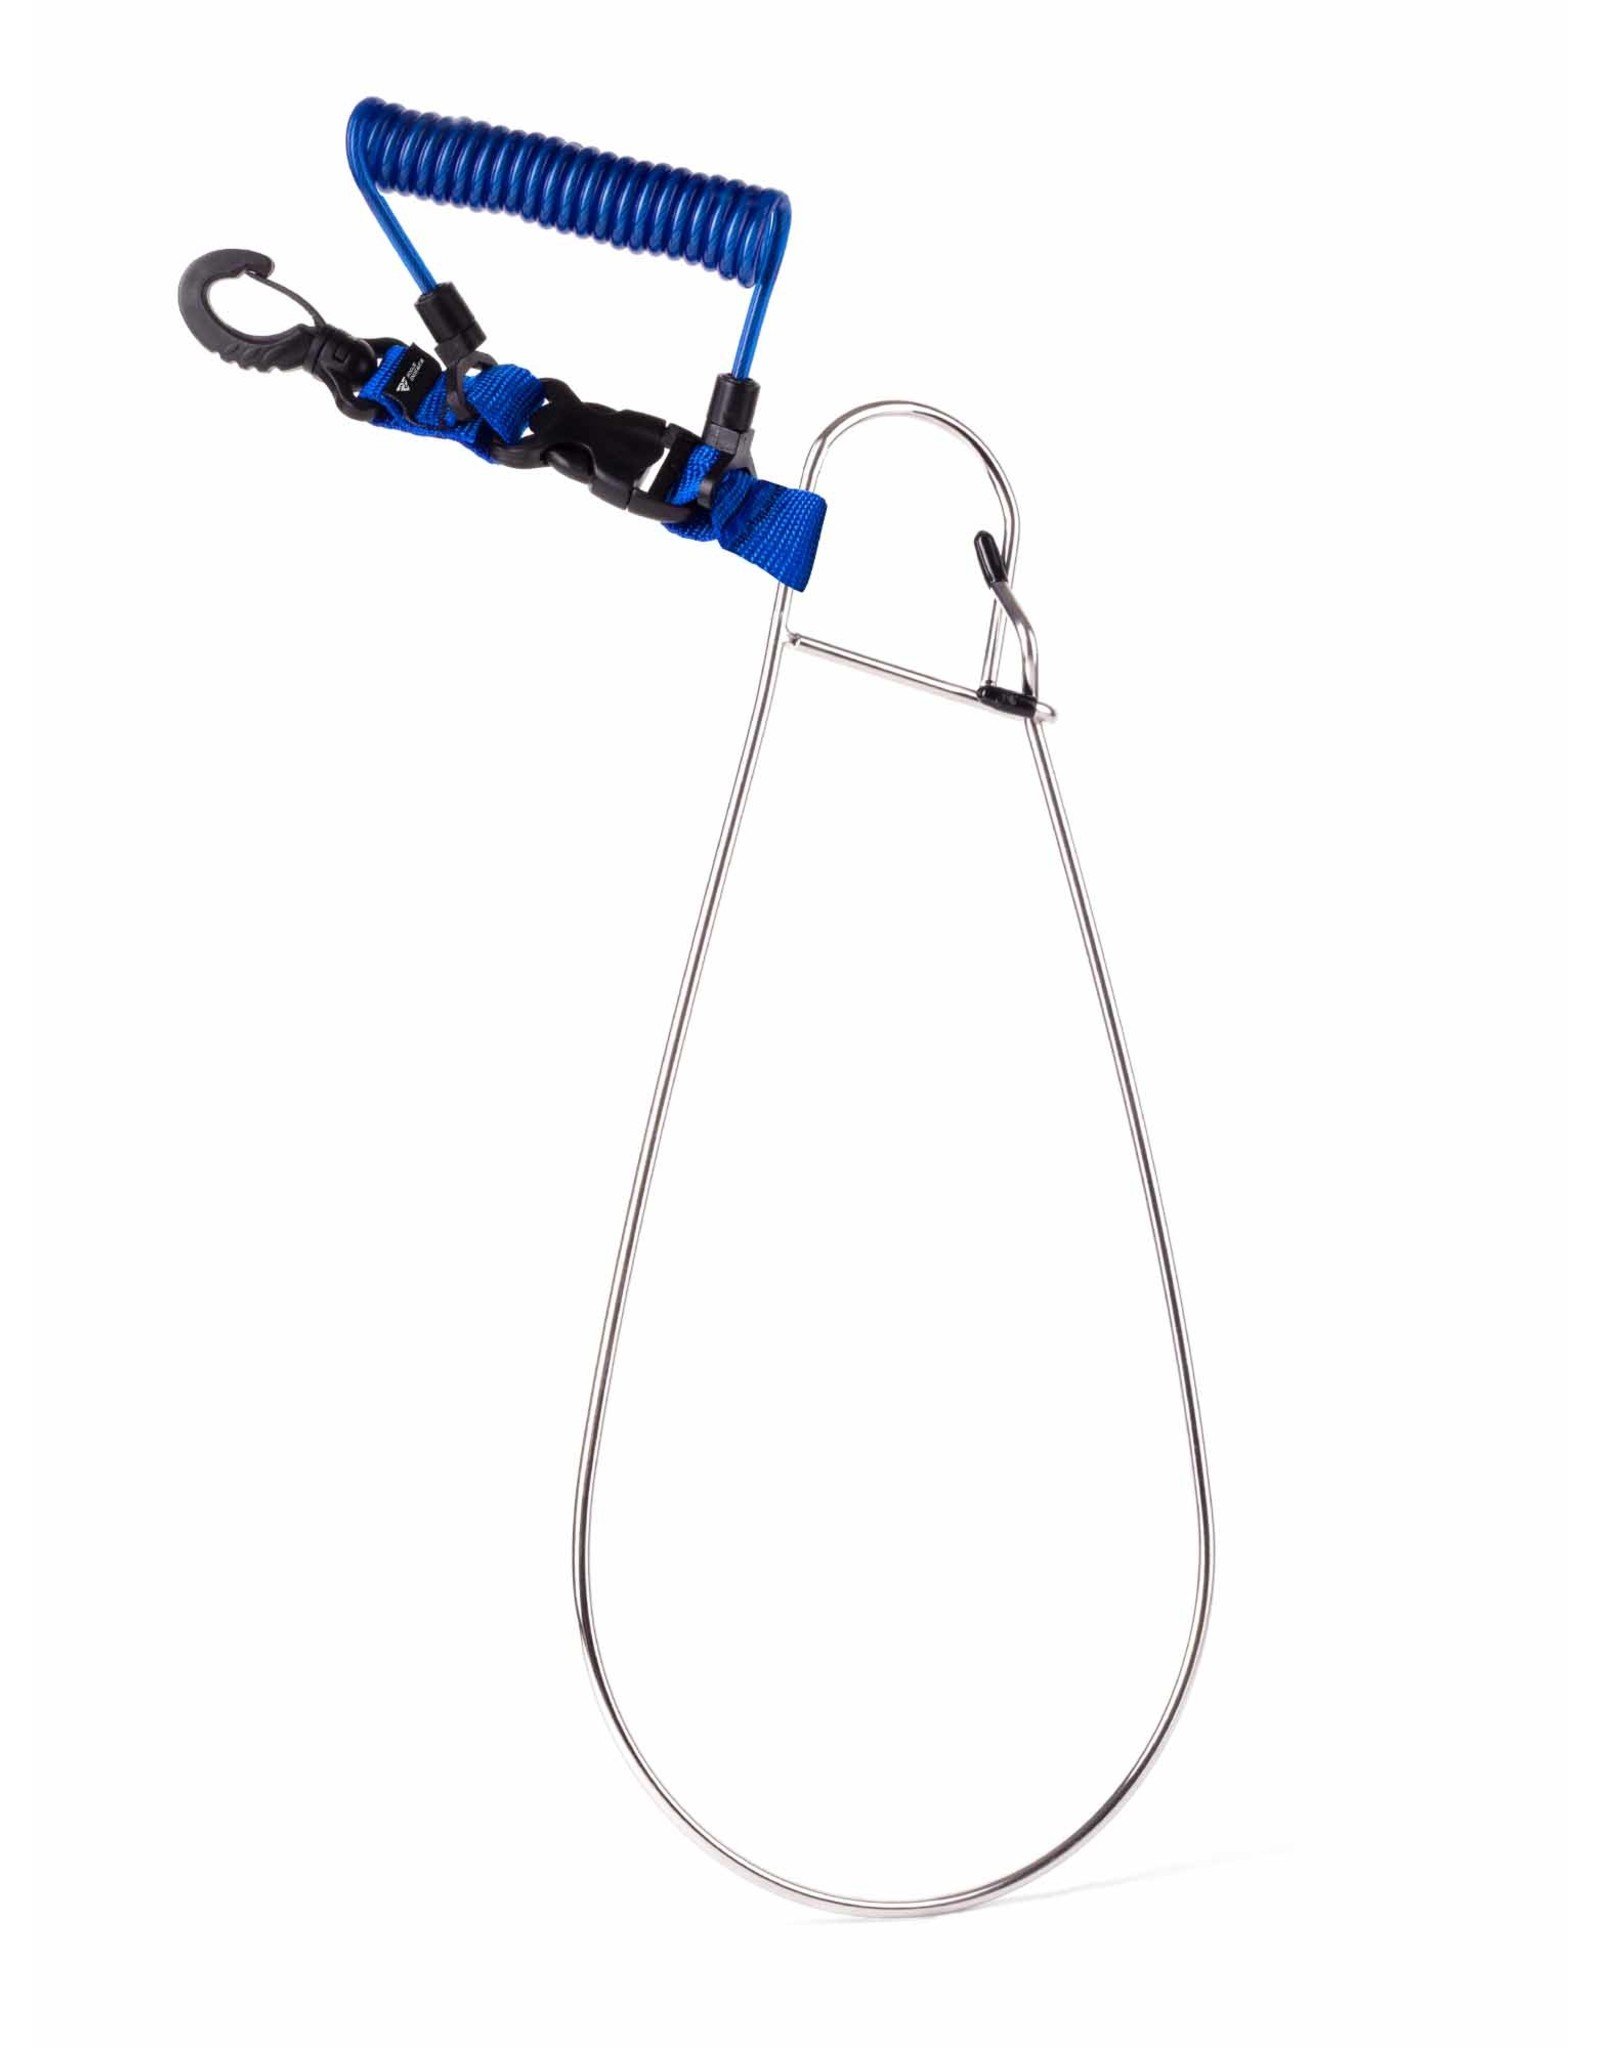 Rogue Endeavor Rogue Endeavor HD Stainless Game Clip Stringer- Large w/Lanyard - Blue